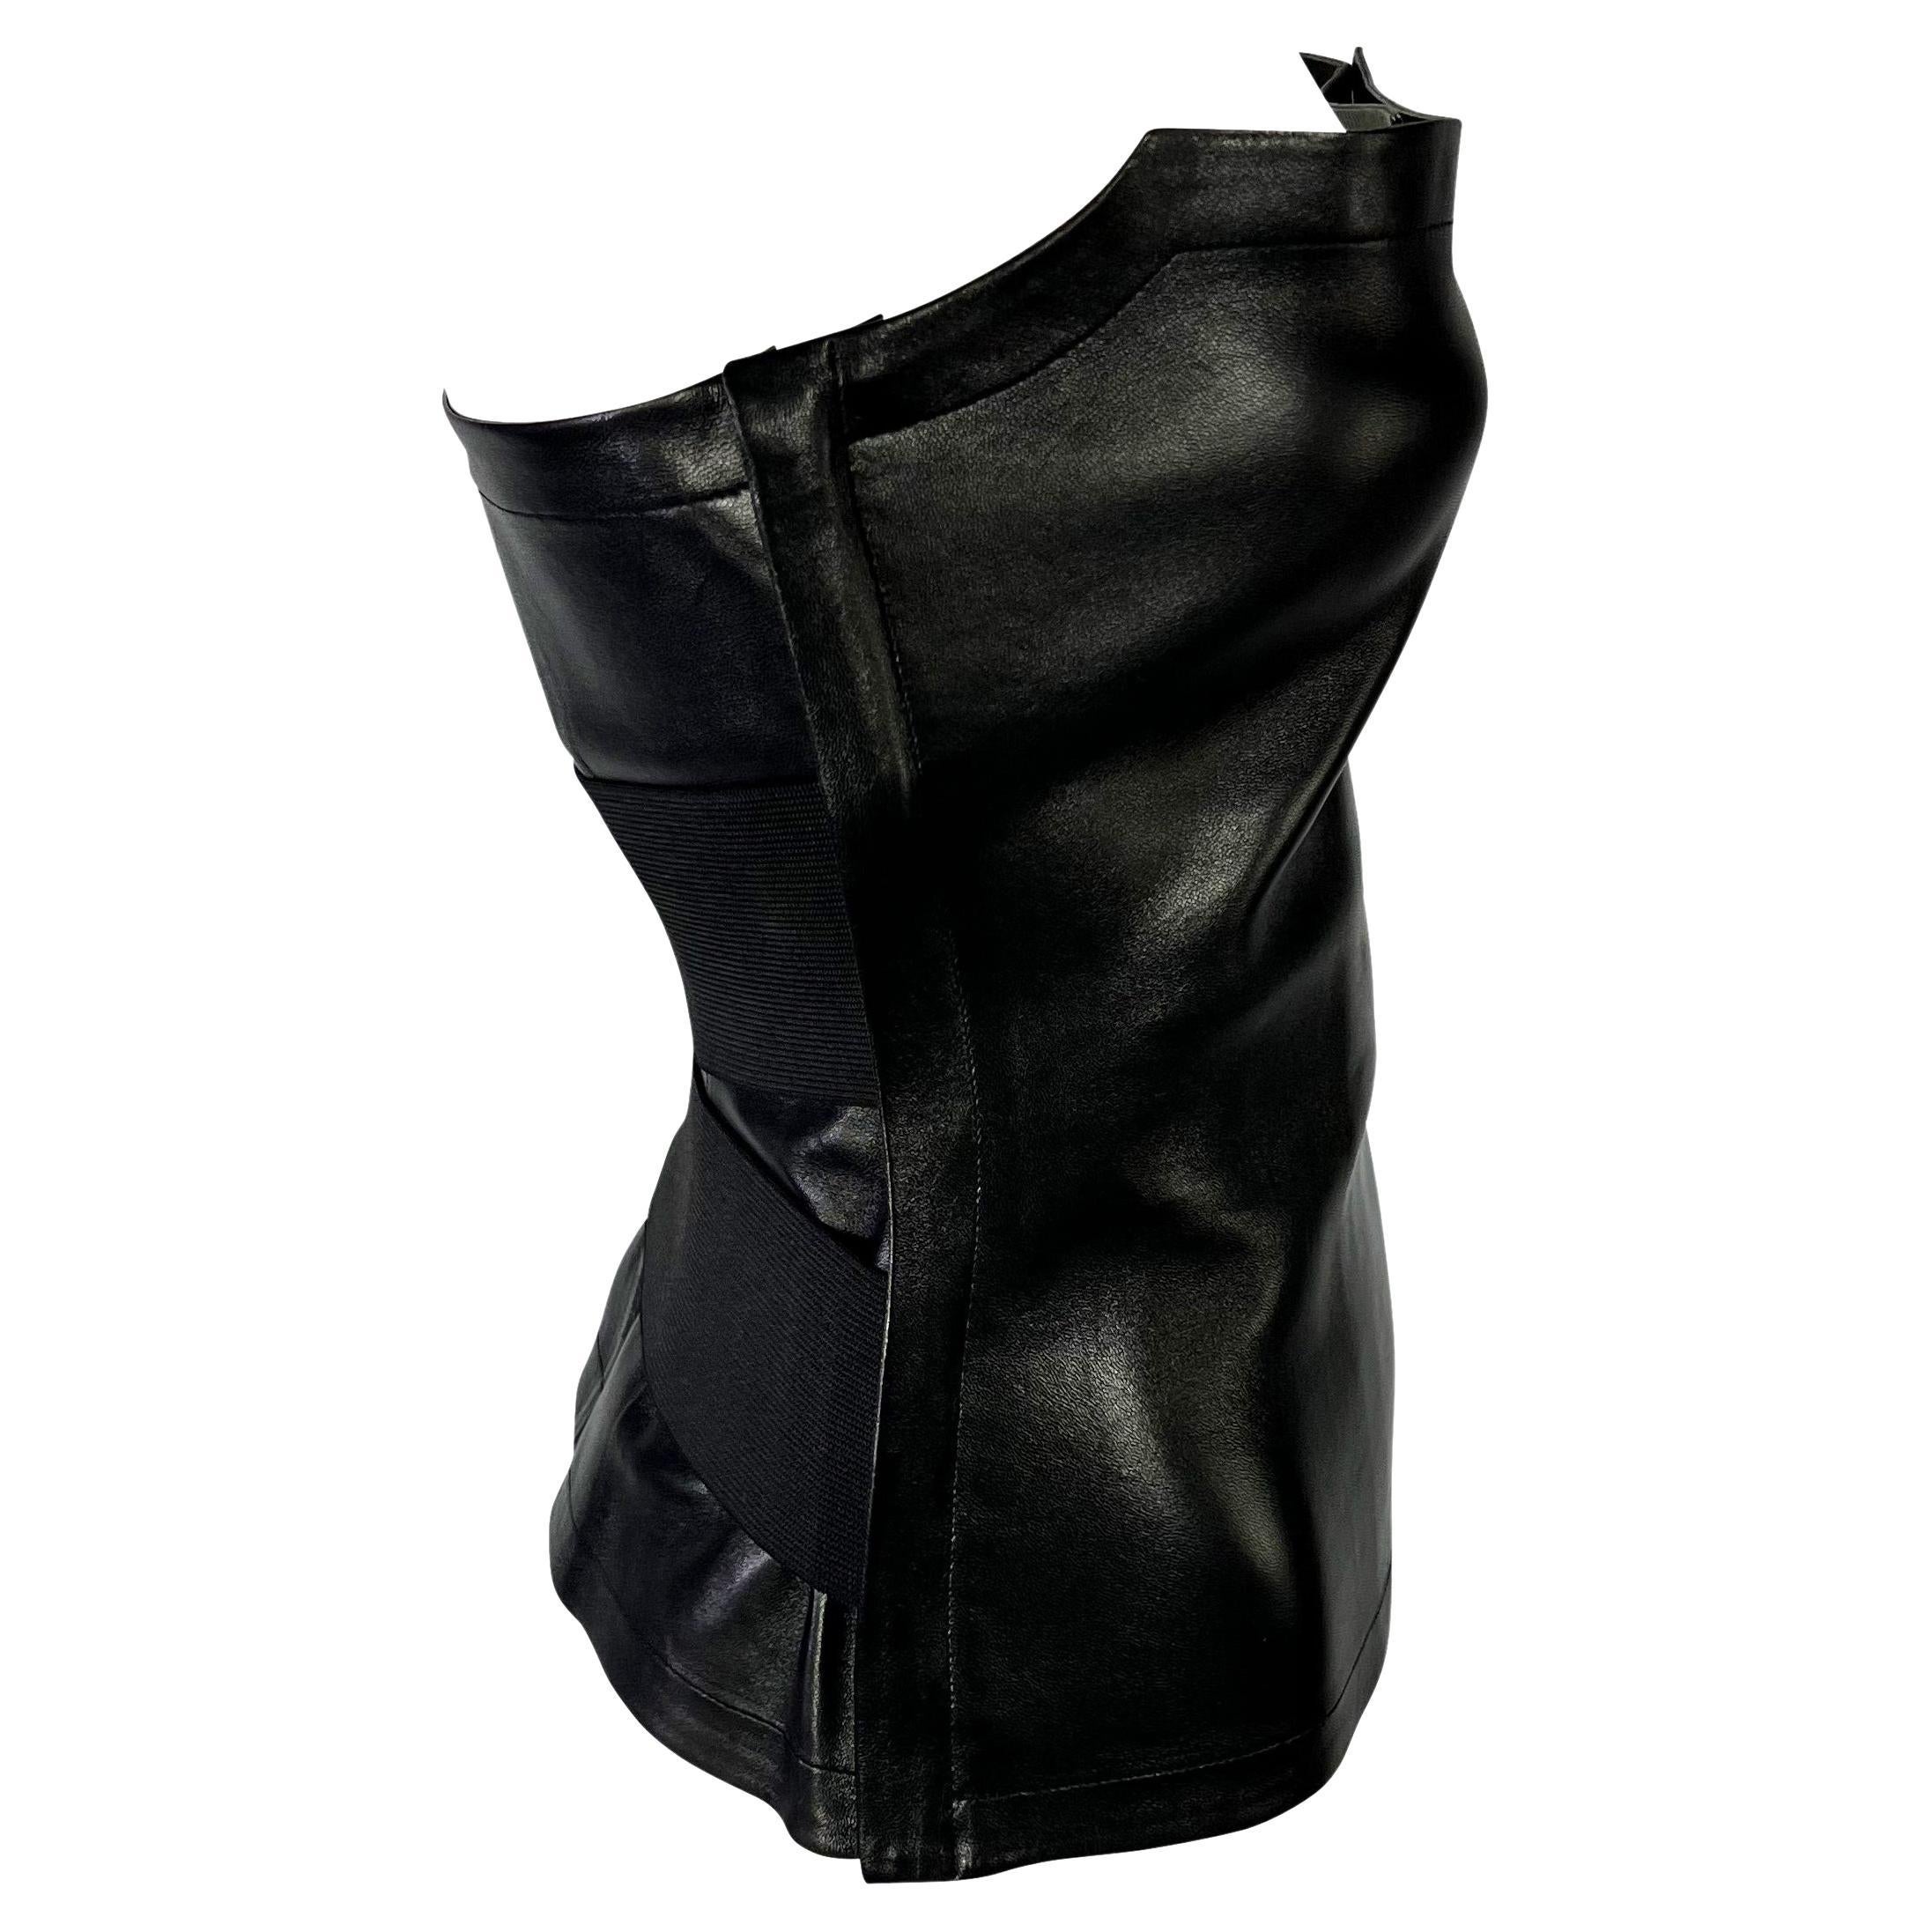 NWT S/S 2001 Yves Saint Laurent by Tom Ford Black Leather Bandage Strap Bustier For Sale 2